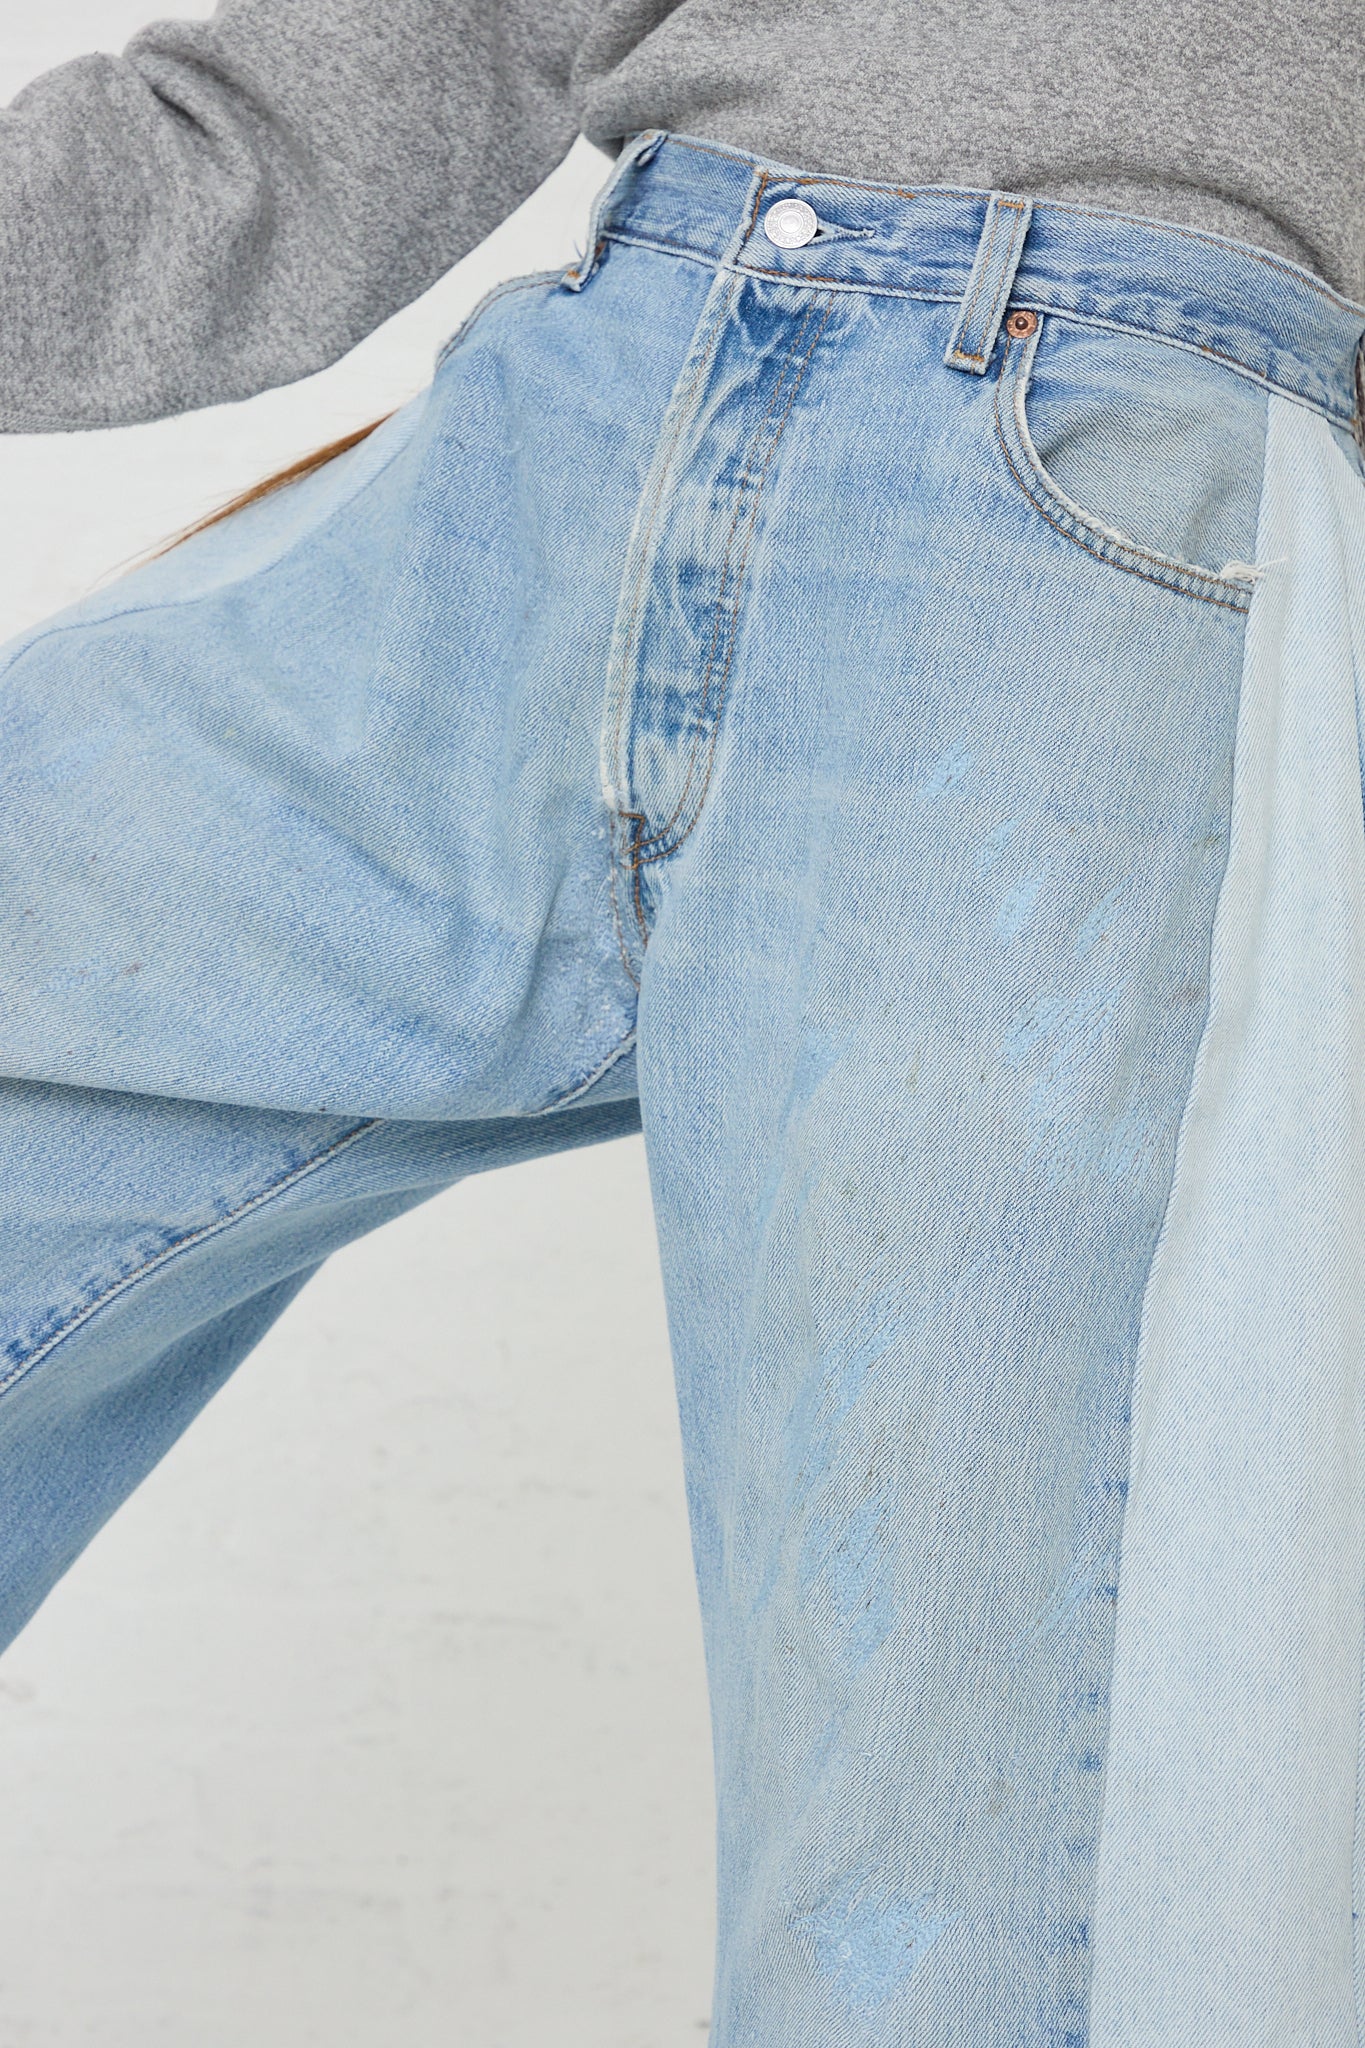 The woman is wearing a pair of B Sides Lasso Jean in Vintage Indigo with a cutoff frayed hem. Up close view.